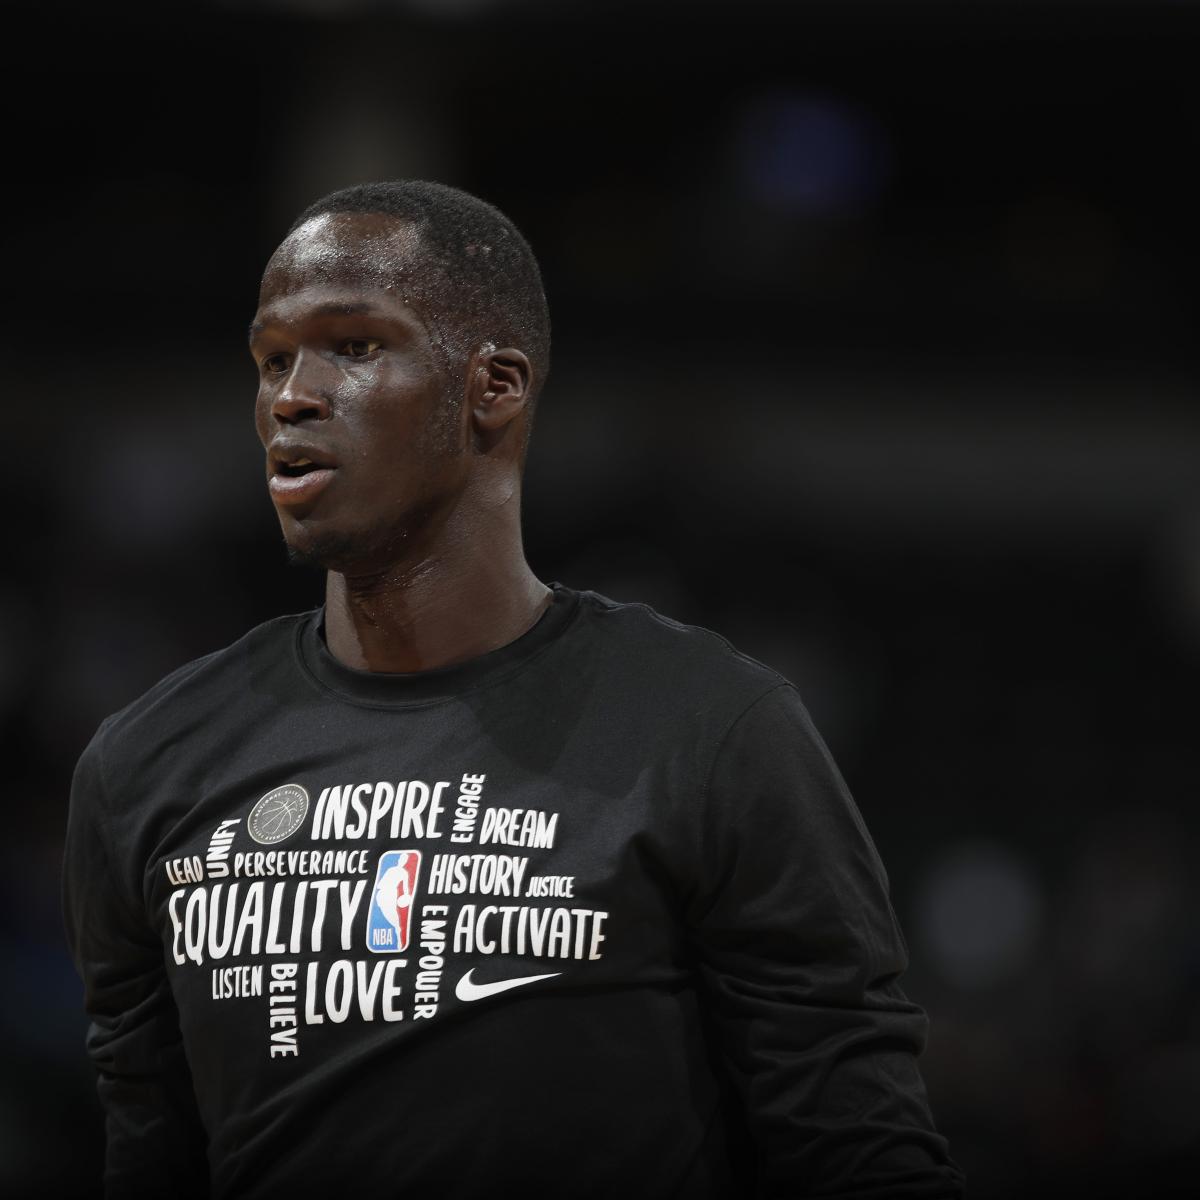 Thon Maker Reportedly FA After Pistons Don’t Lengthen Qualifying Contract Offer